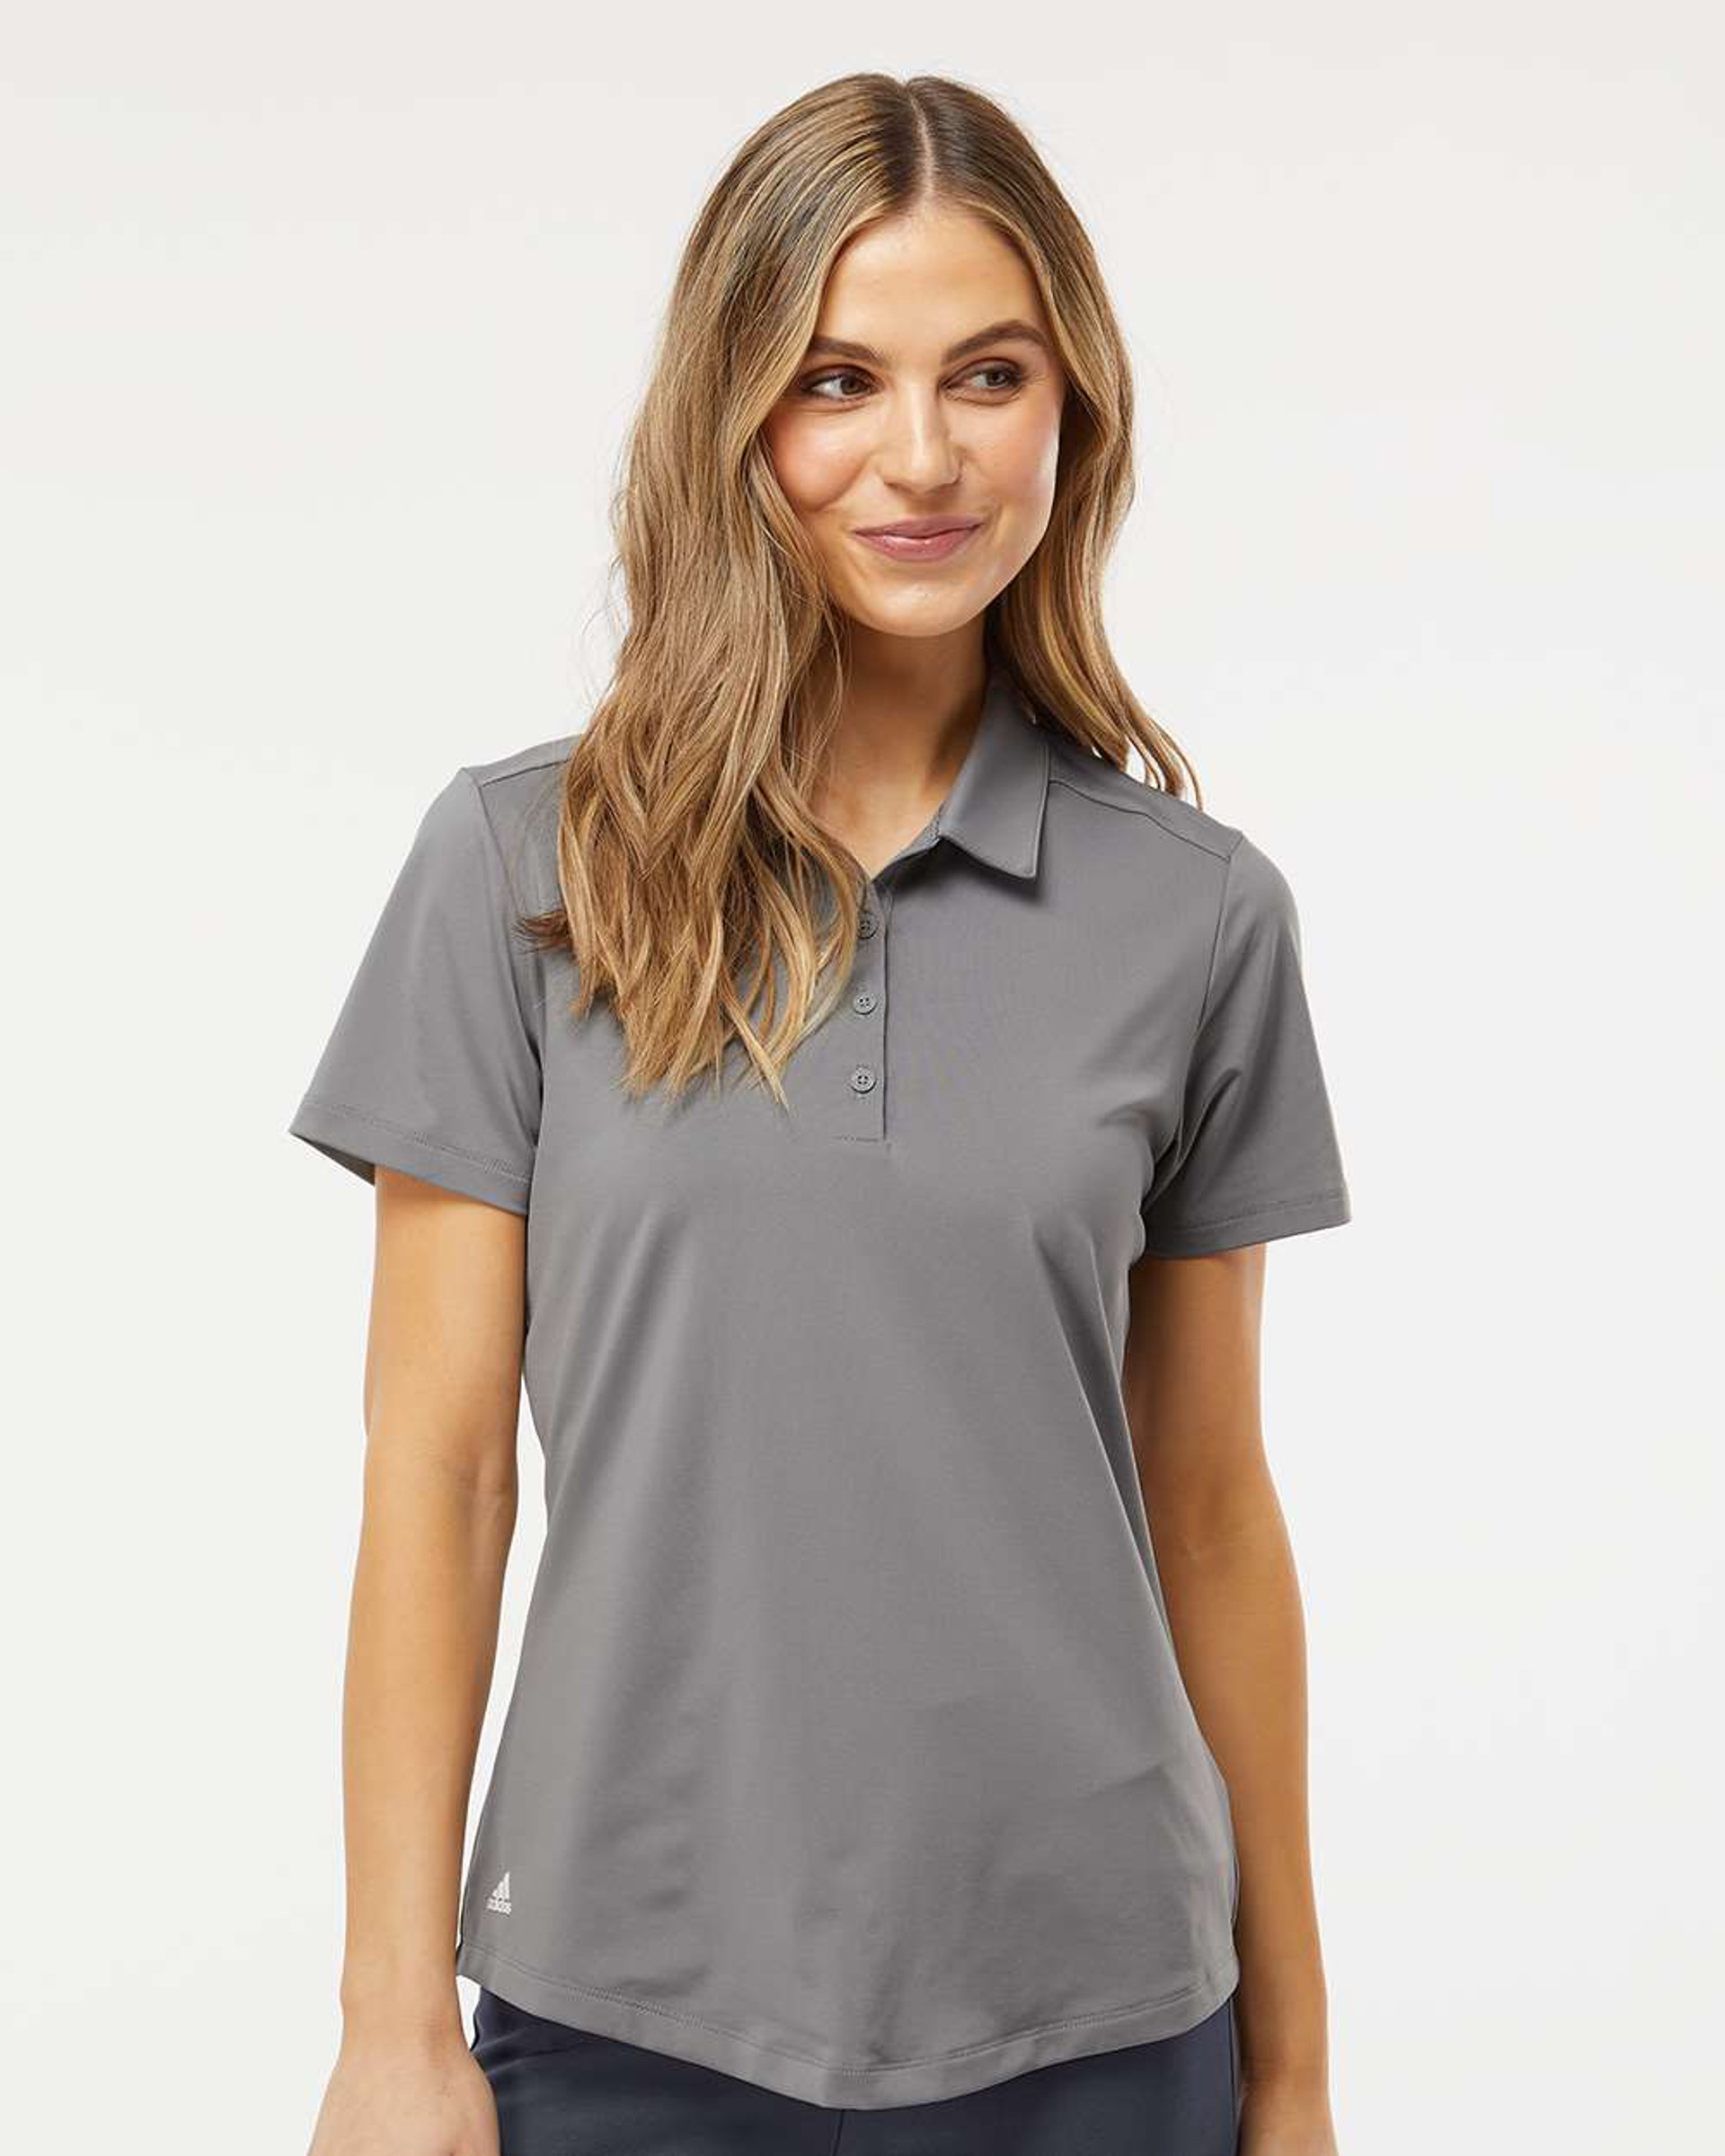 Adidas A515 Women's Ultimate Solid Polo - T-shirt.ca